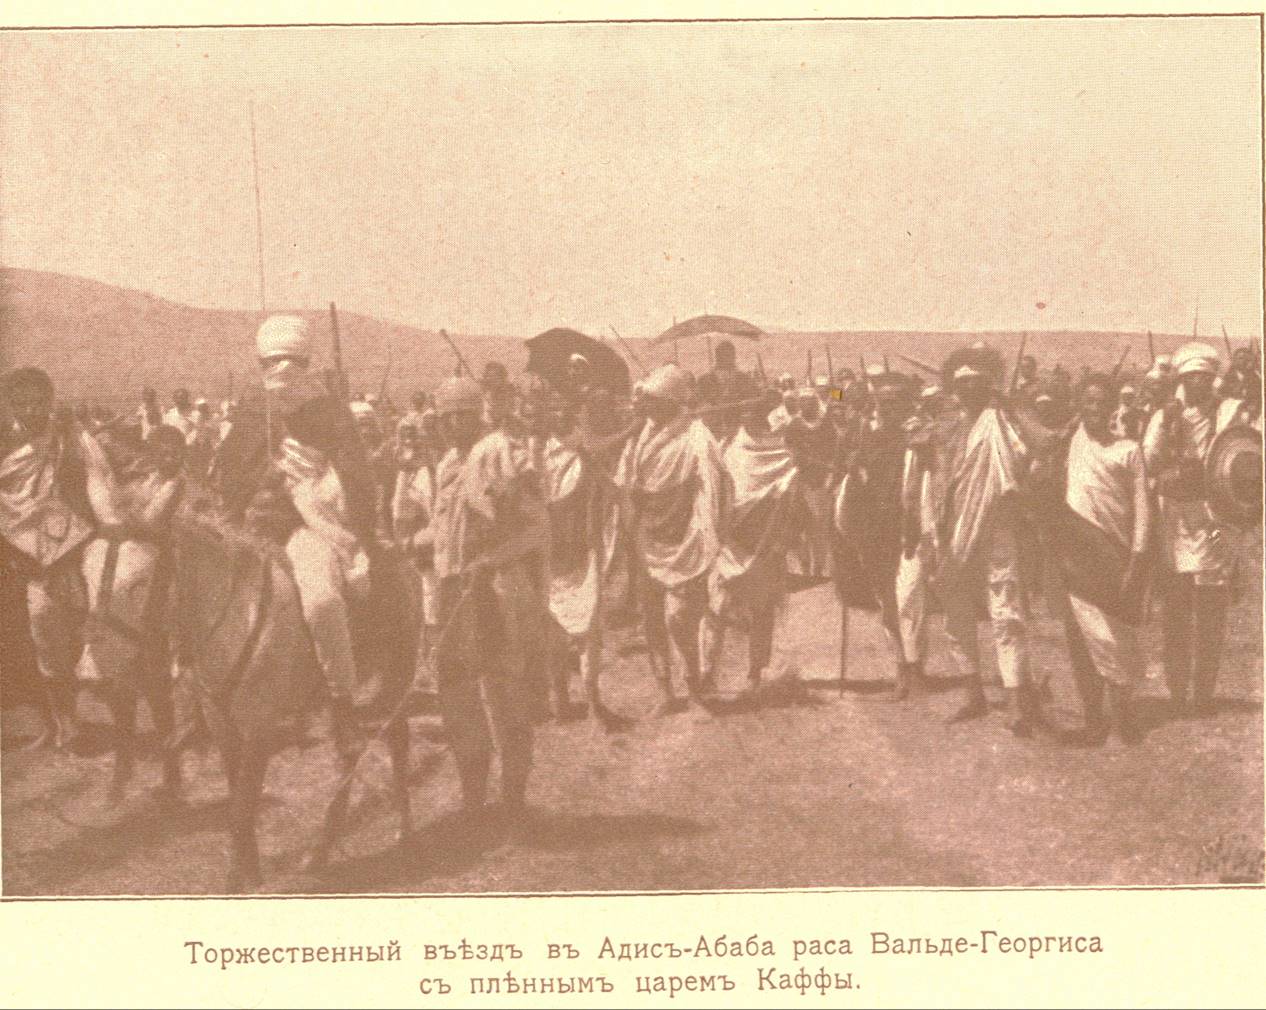 Ethiopia Through Russian Eyes, including With the Armies of